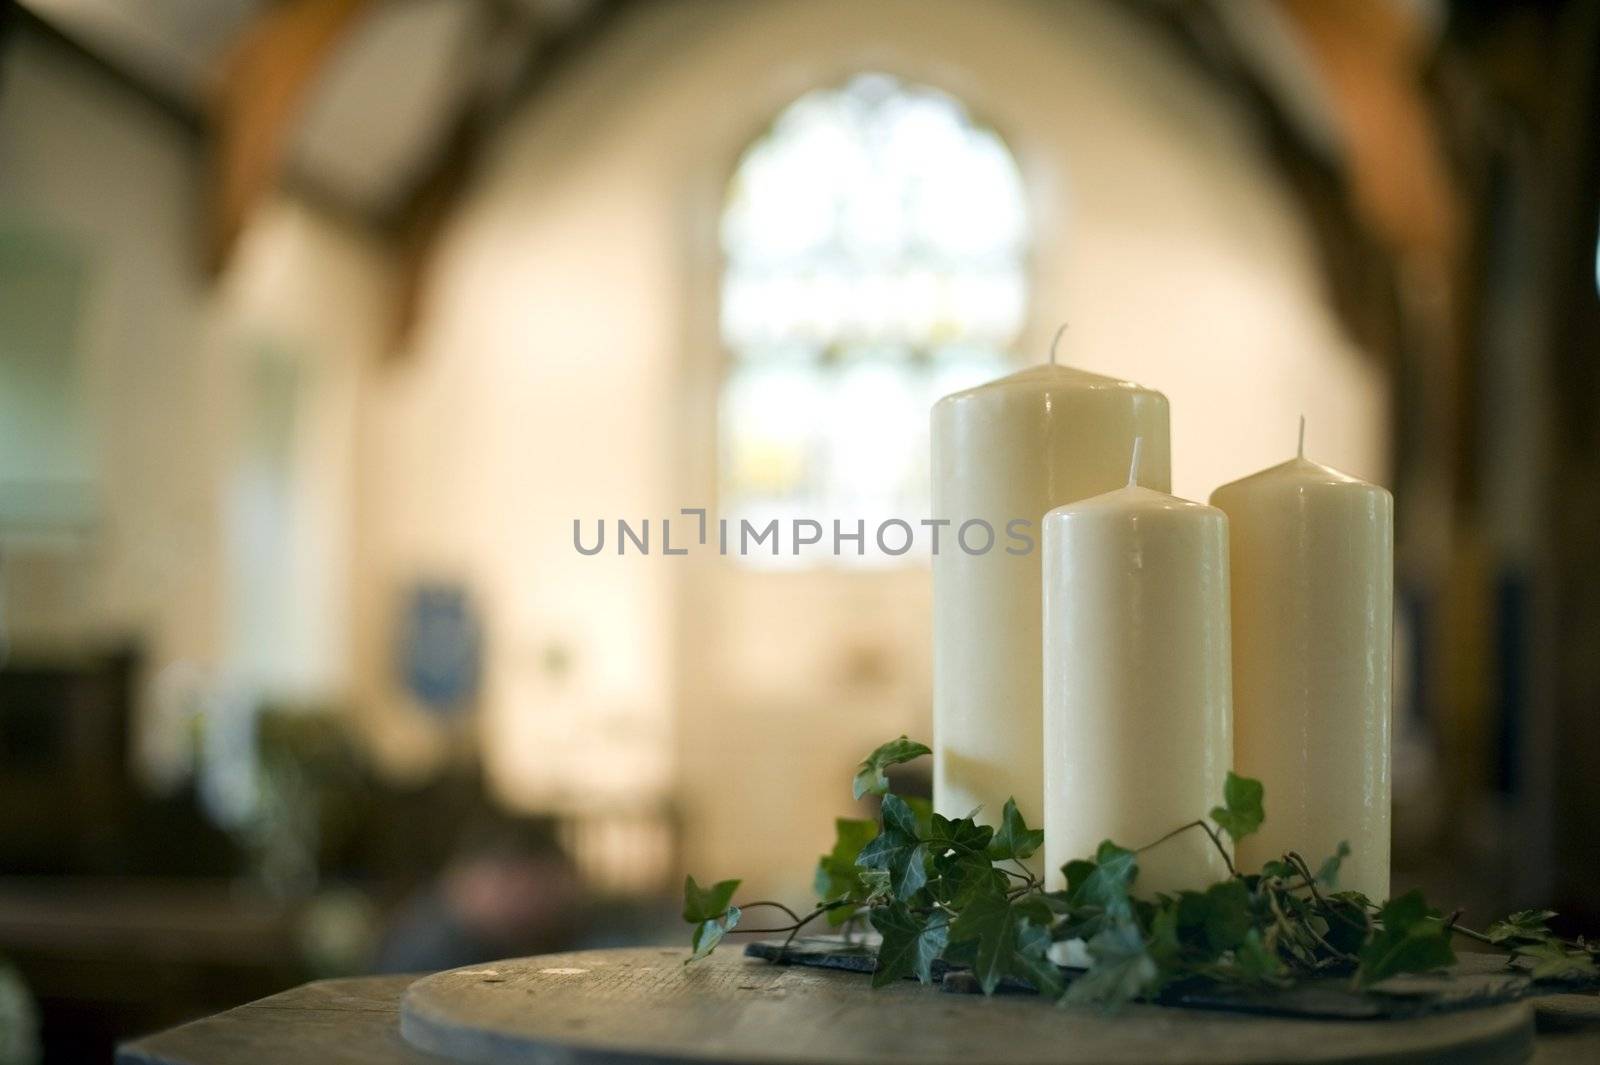 a narrow depth of field image of the interior of a church focusing only on three white candles